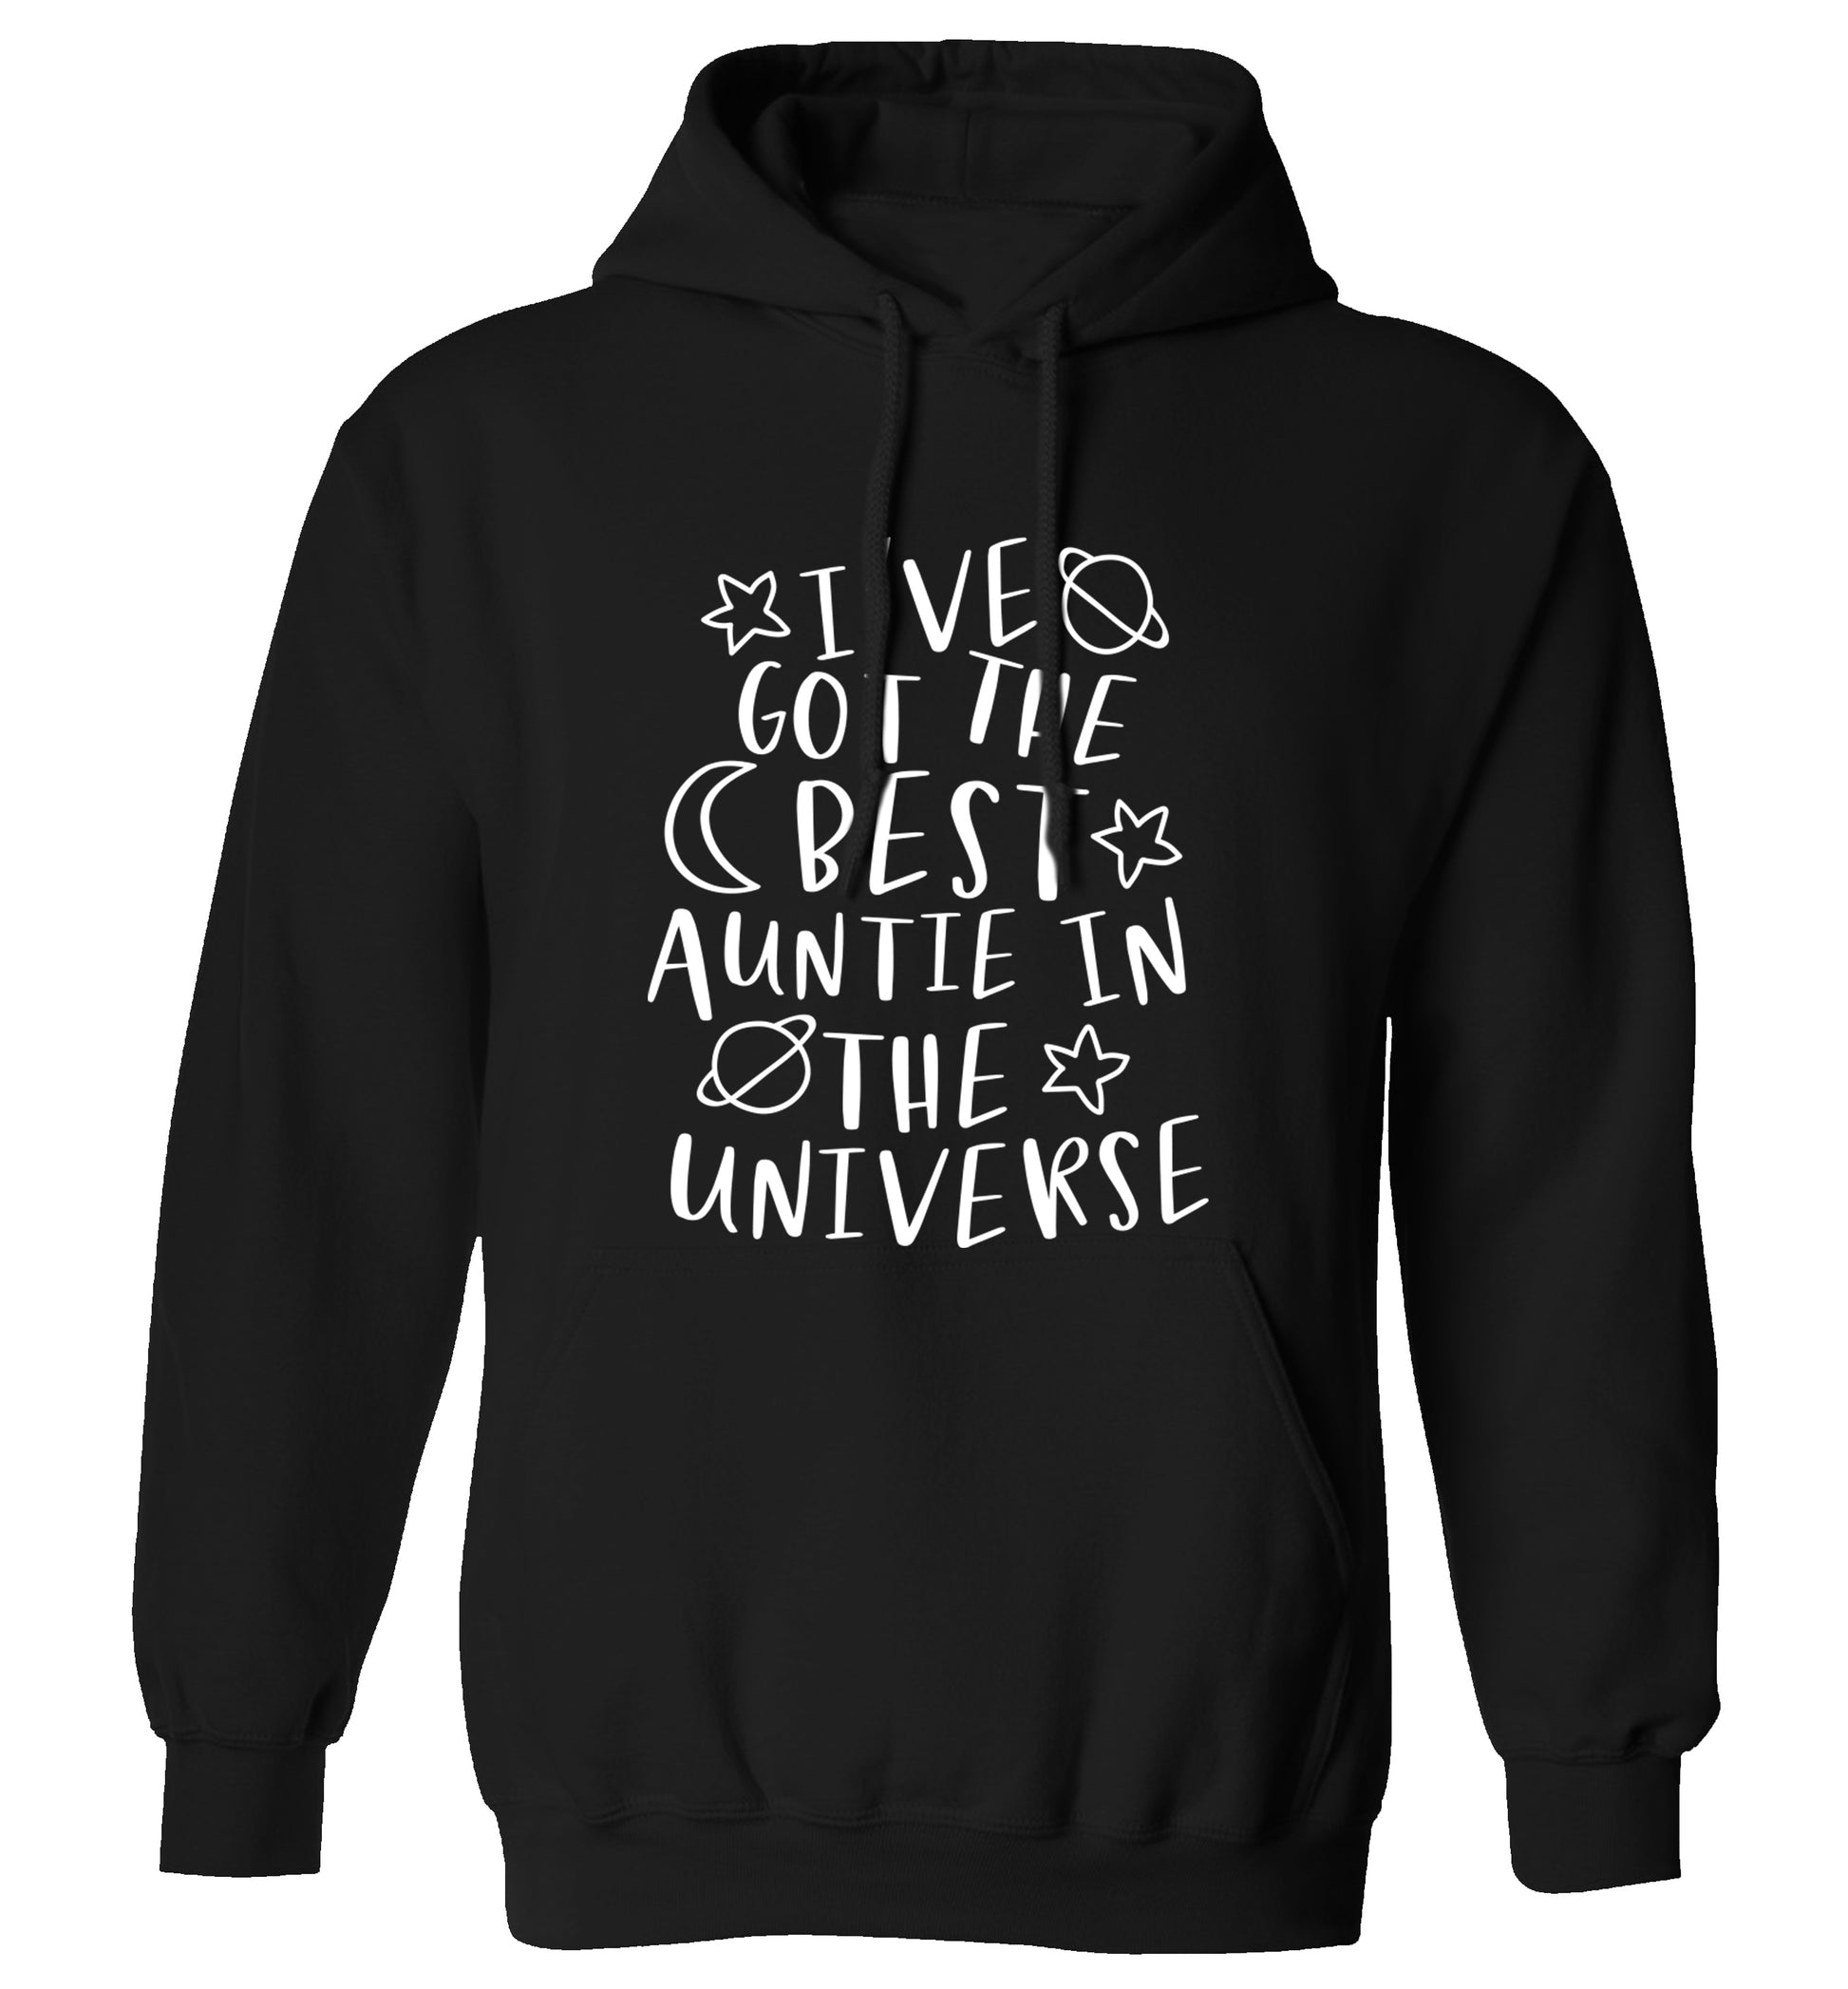 I've got the best auntie in the universe adults unisex black hoodie 2XL